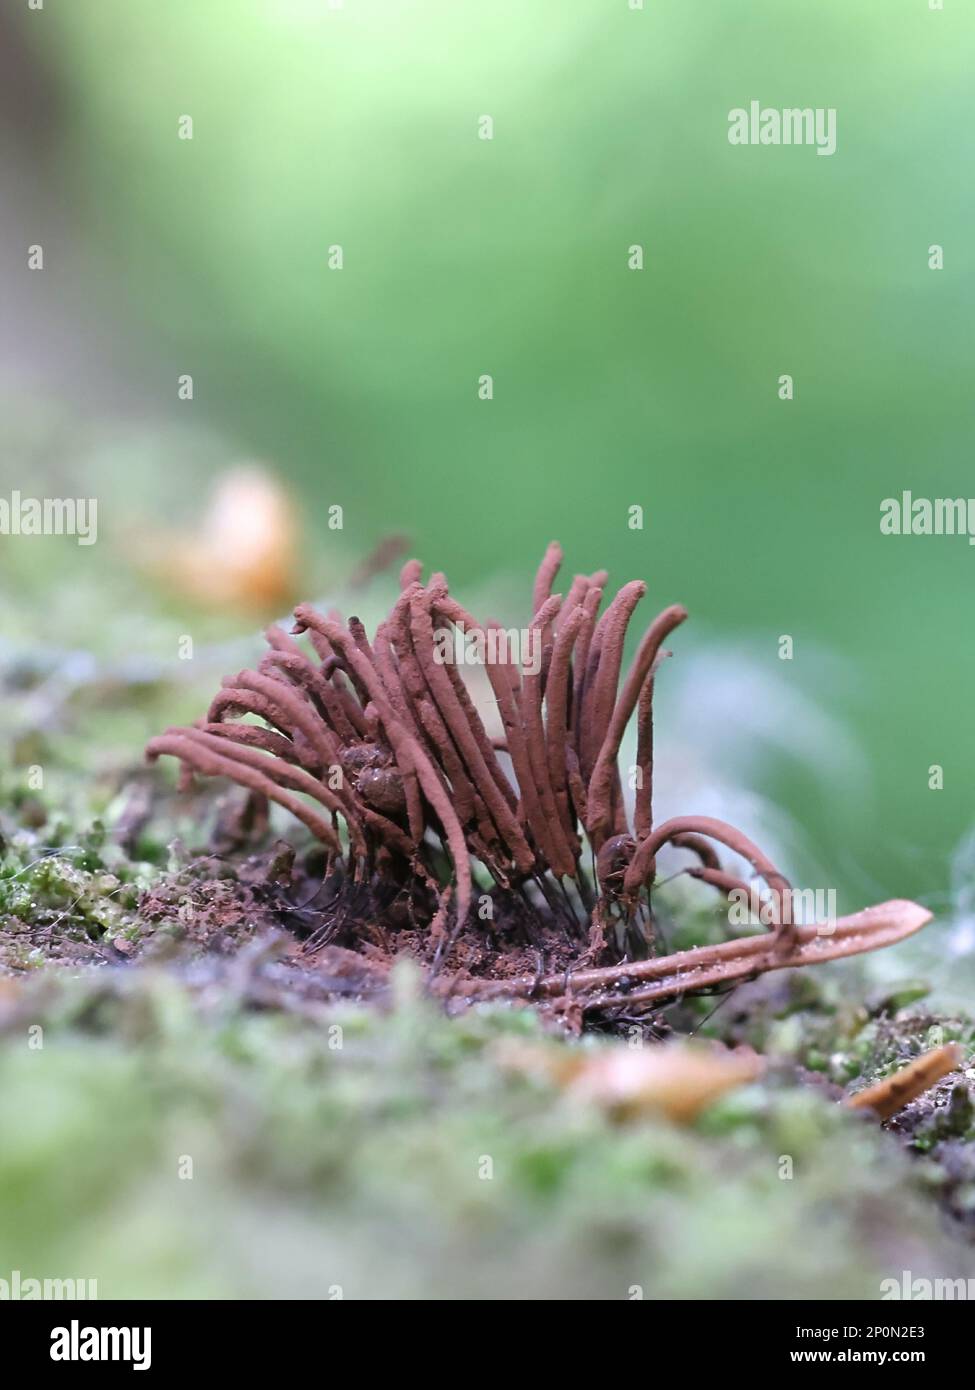 Stemonitis axifera, known as the chocolate tube slime mold, myxomycete from Finland Stock Photo